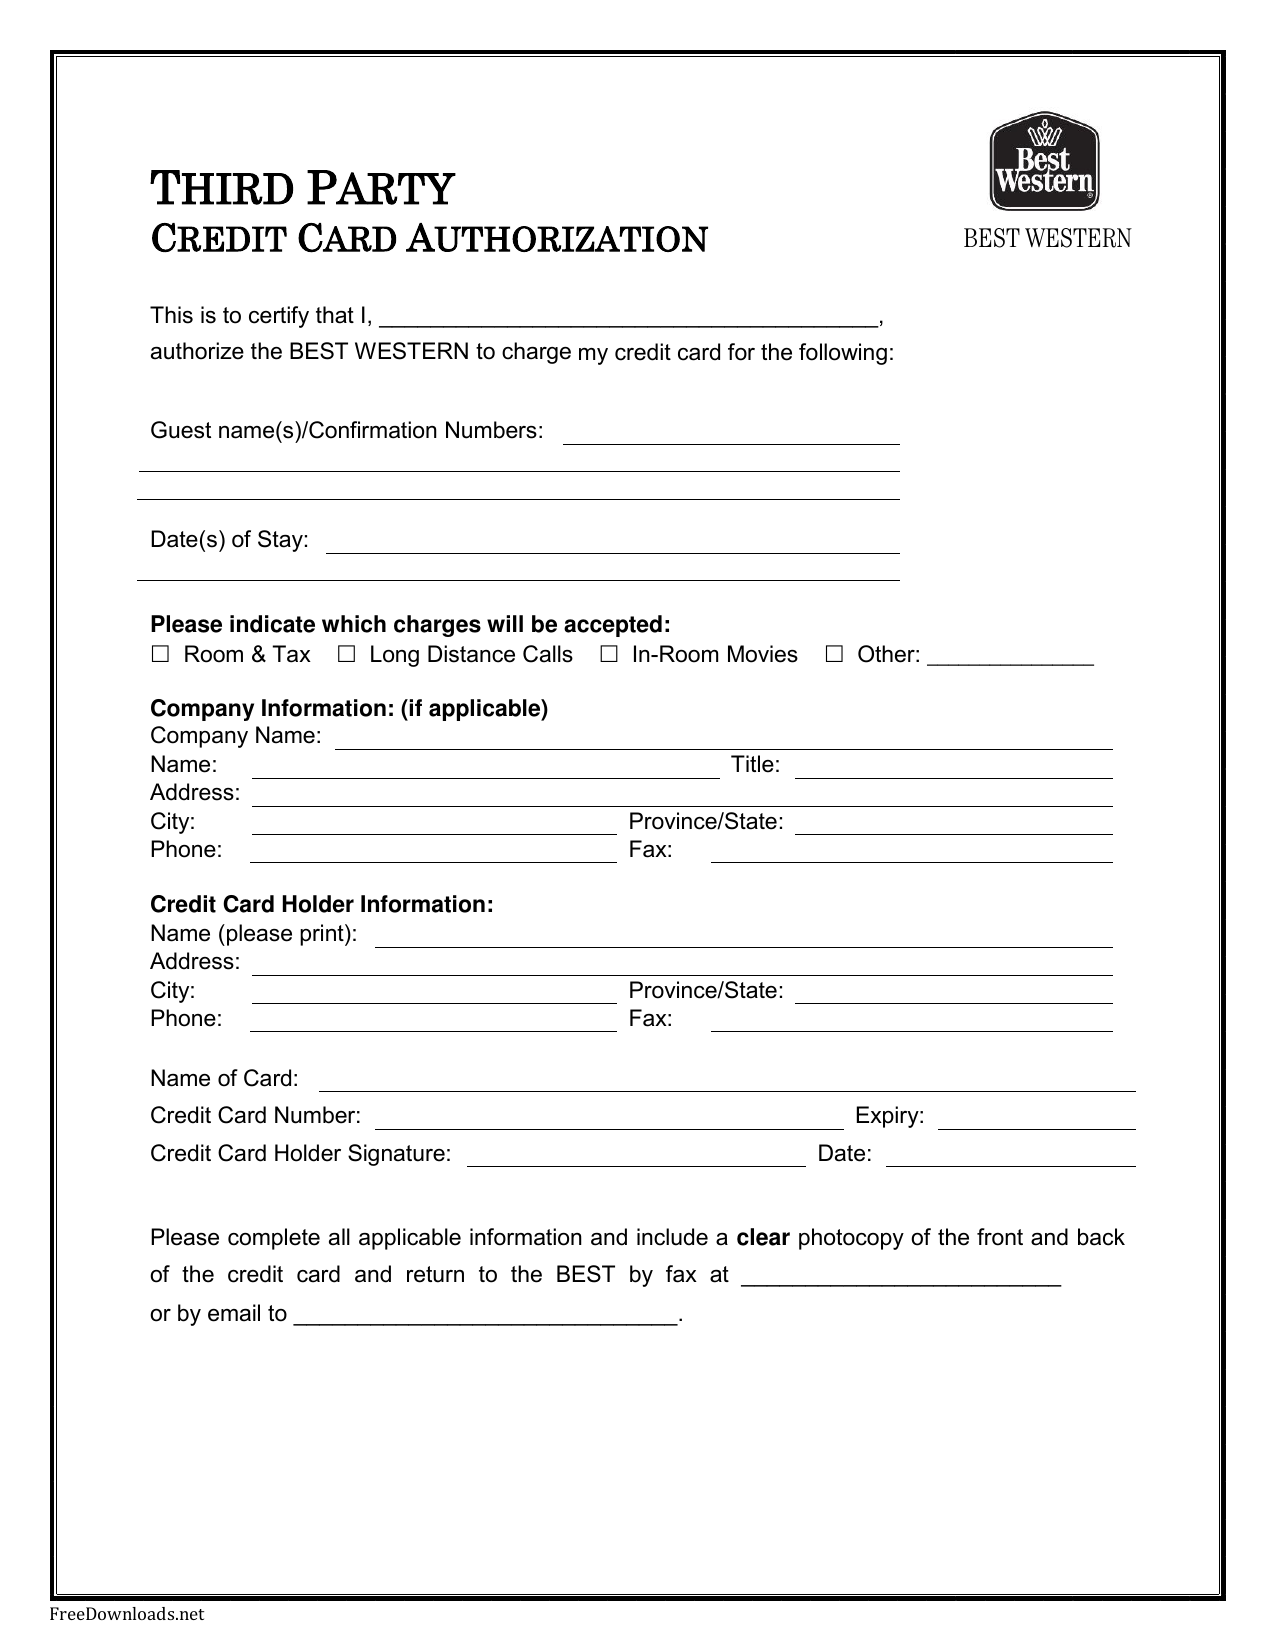 Download Best Western Credit Card Authorization Form Template Inside Corporate Credit Card Agreement Template